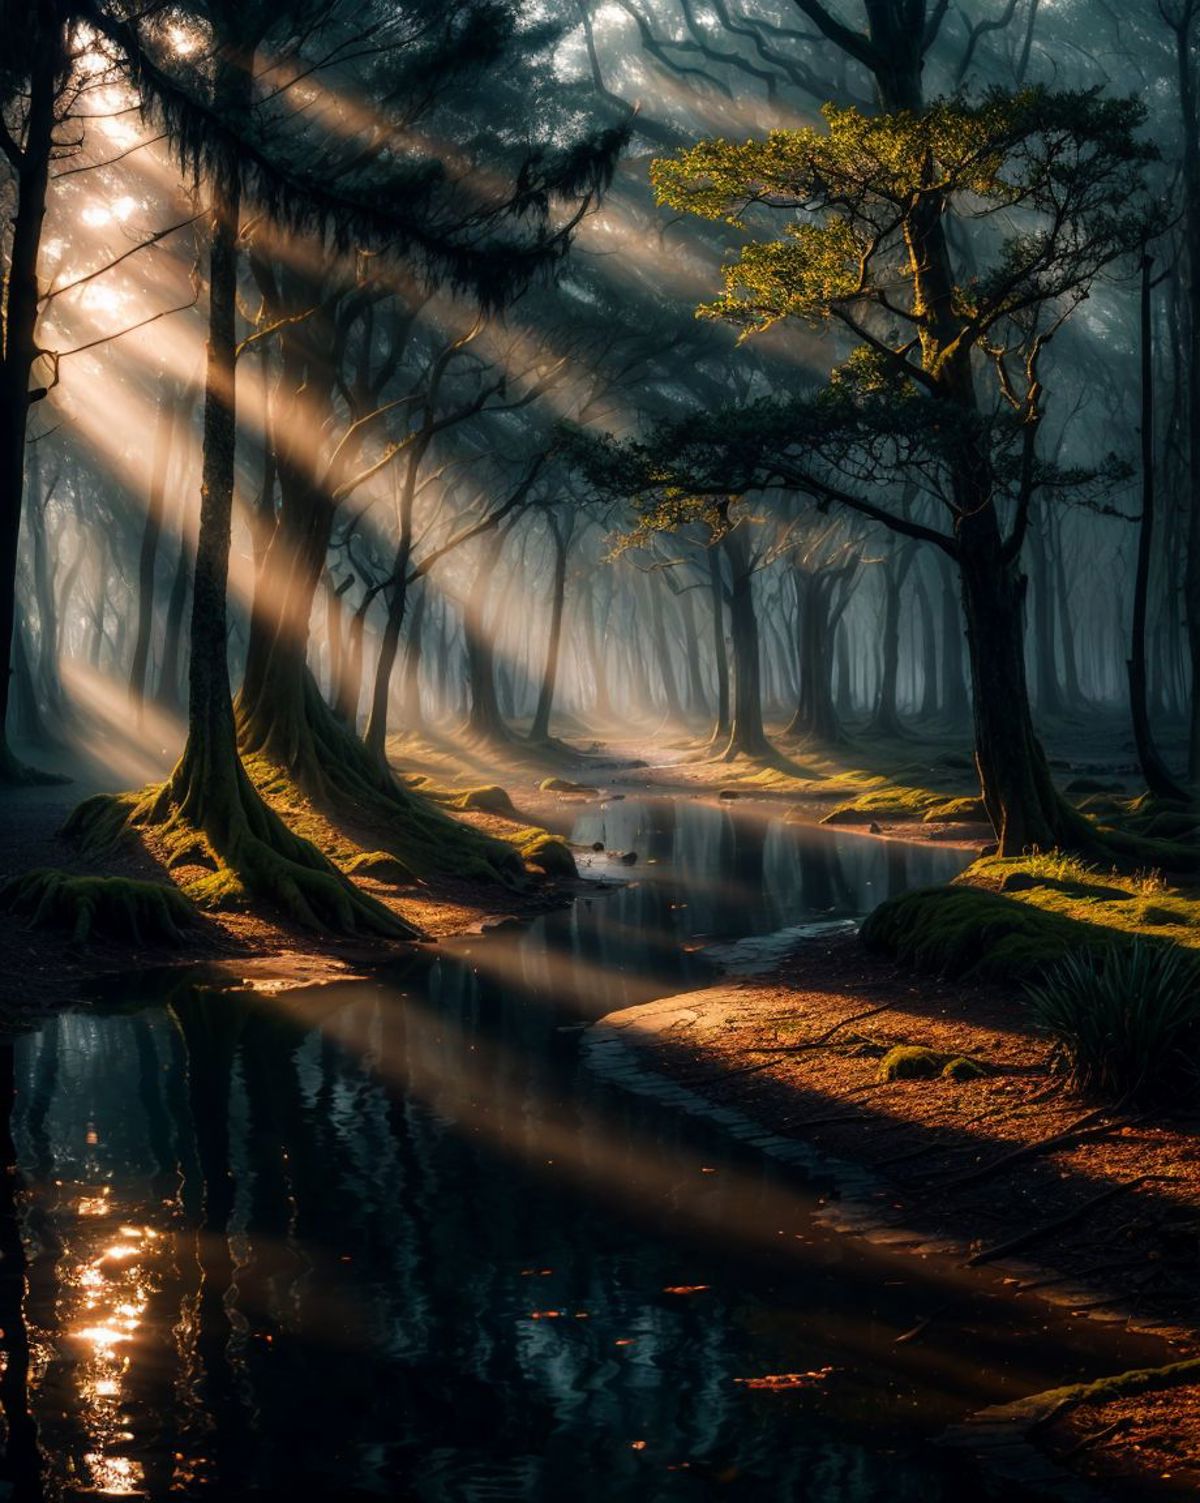 A serene forest scene with a stream of water and sunlight filtering through the trees.